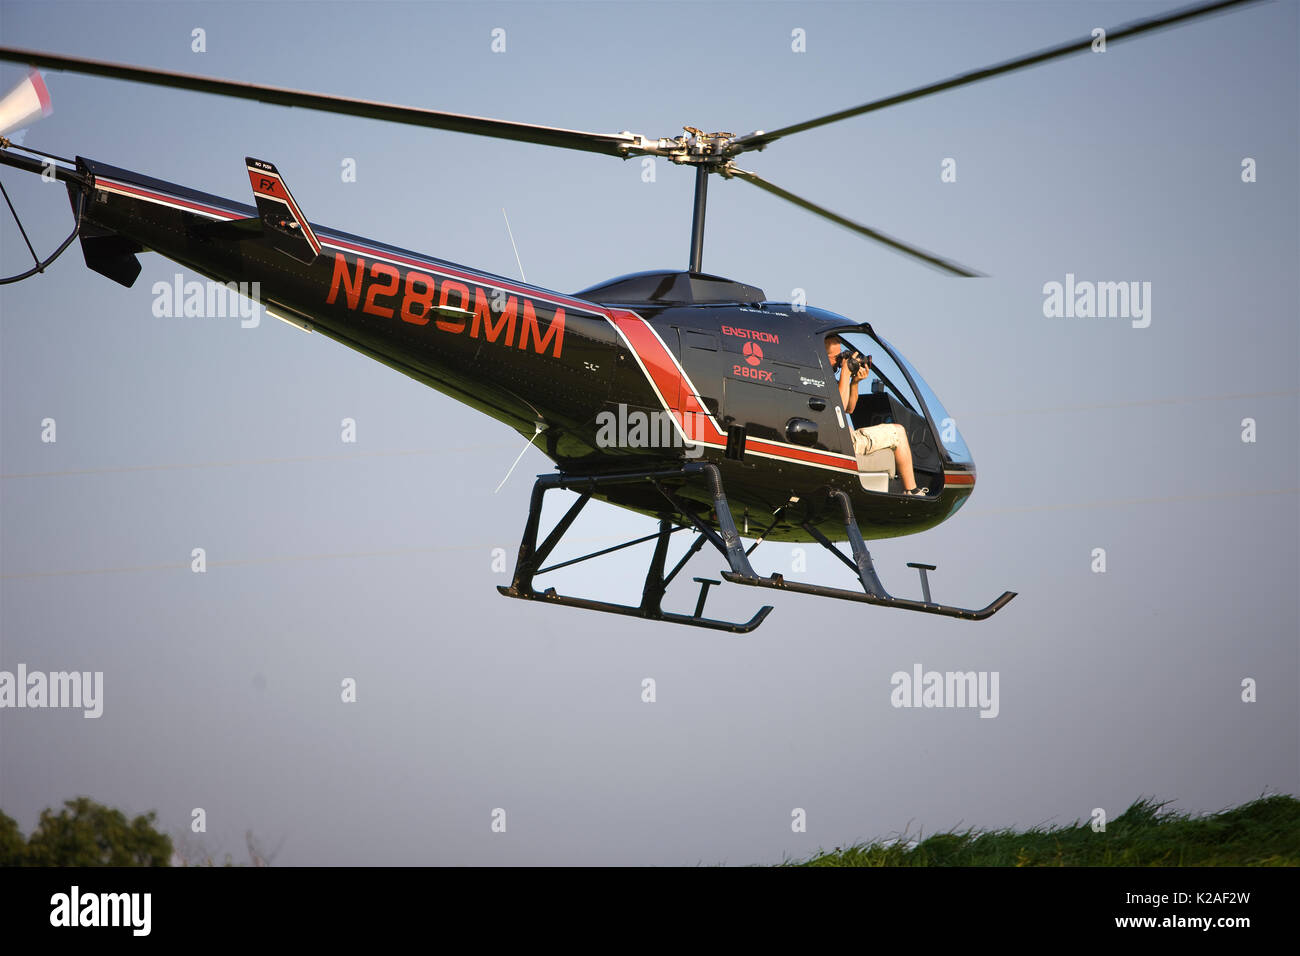 HELICOPTER TAKING OFF TO PERFORM AERIAL PHOTOGRAPHY, LANCASTER PENNSYLVANIA Stock Photo